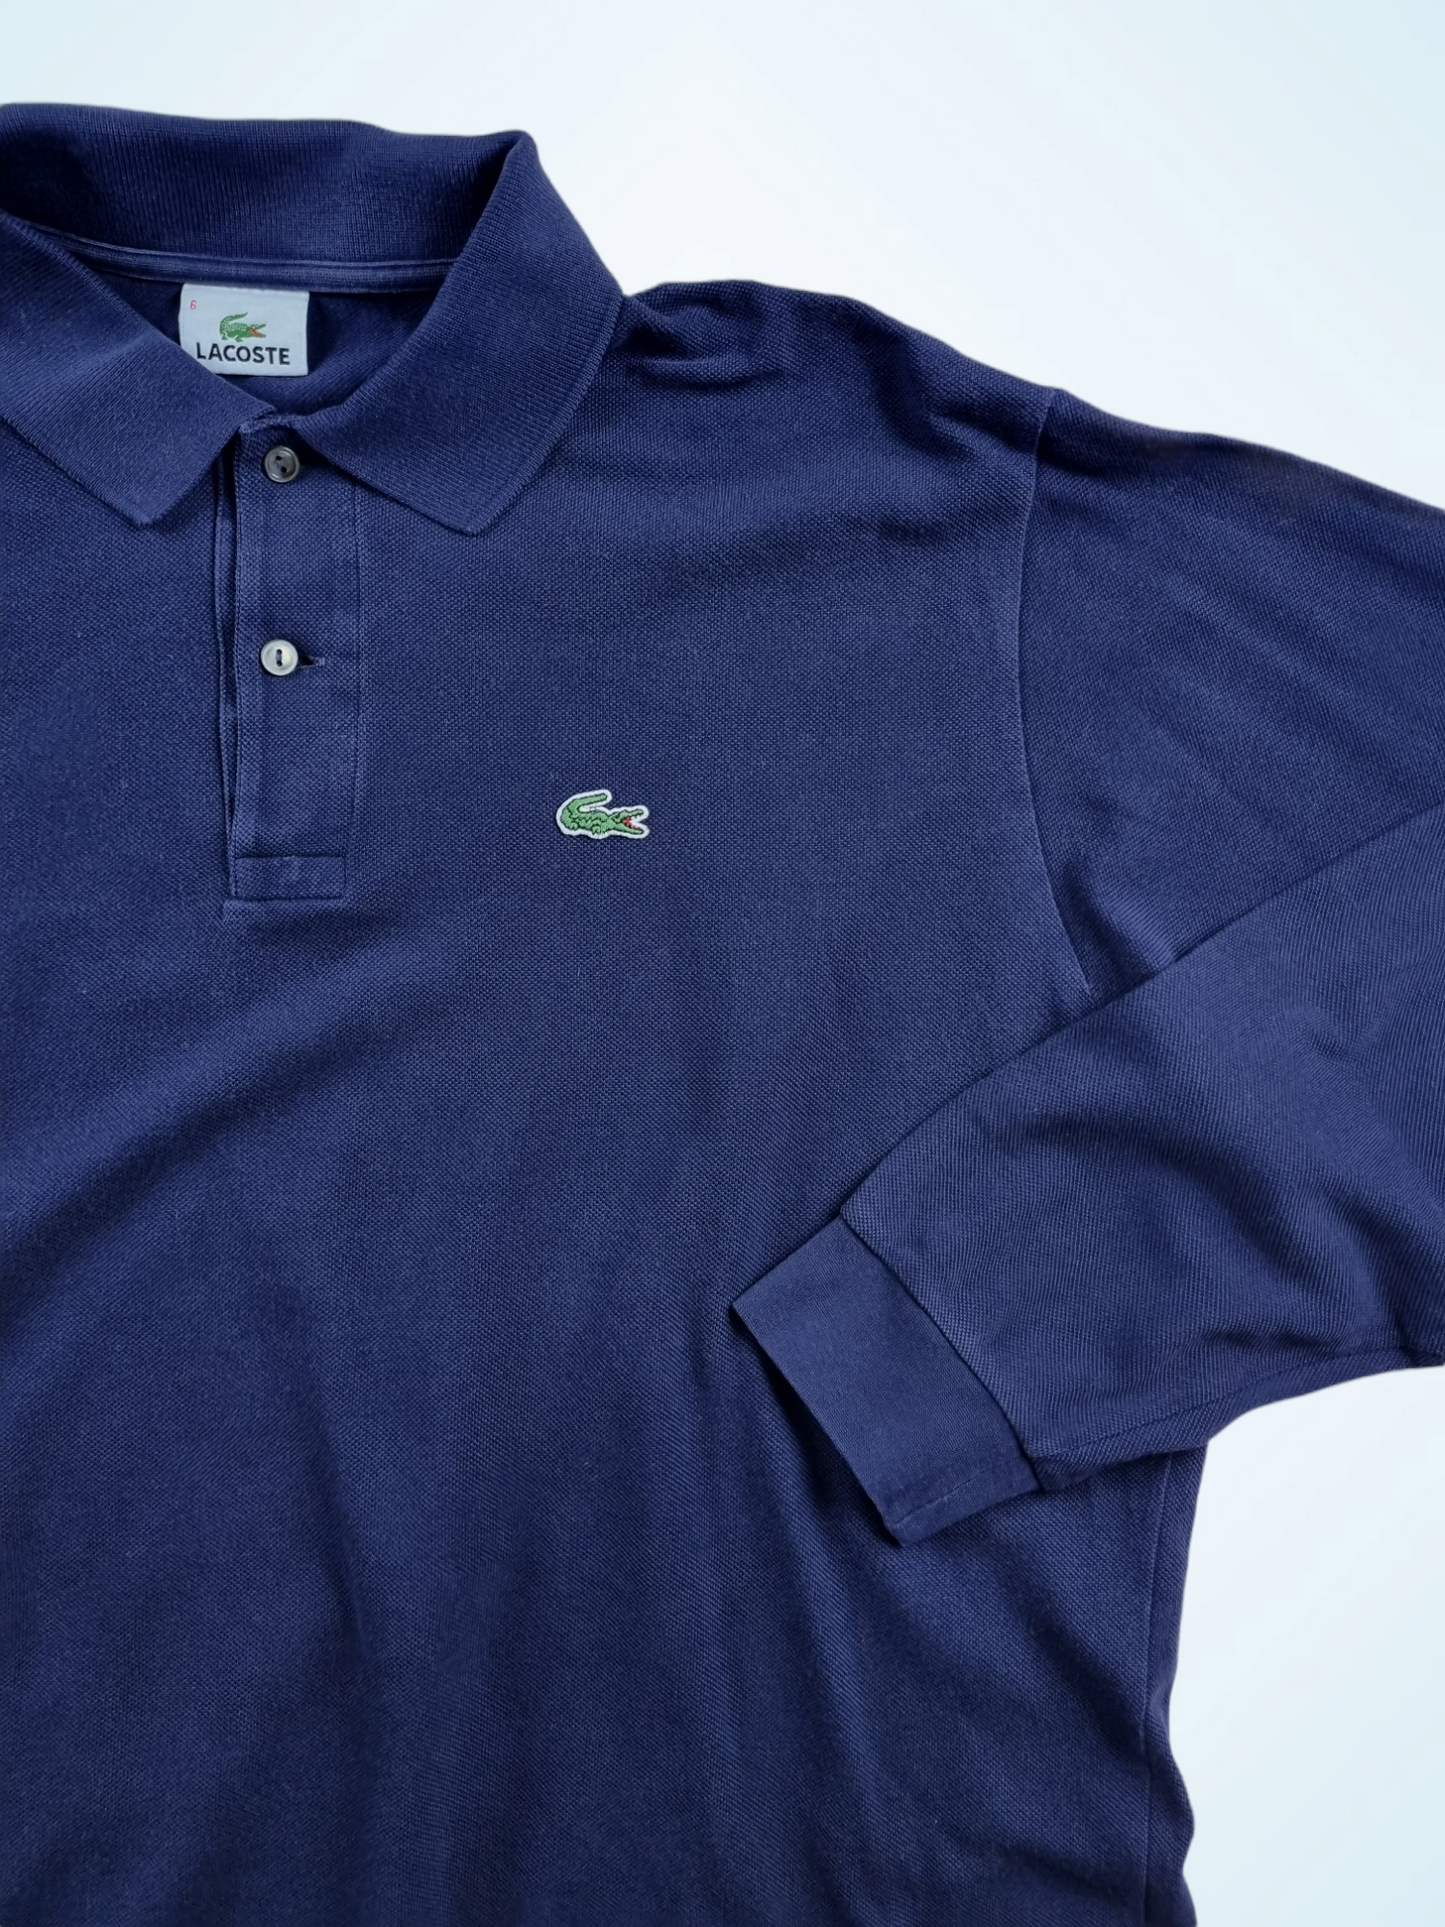 Lacoste polo maat XL